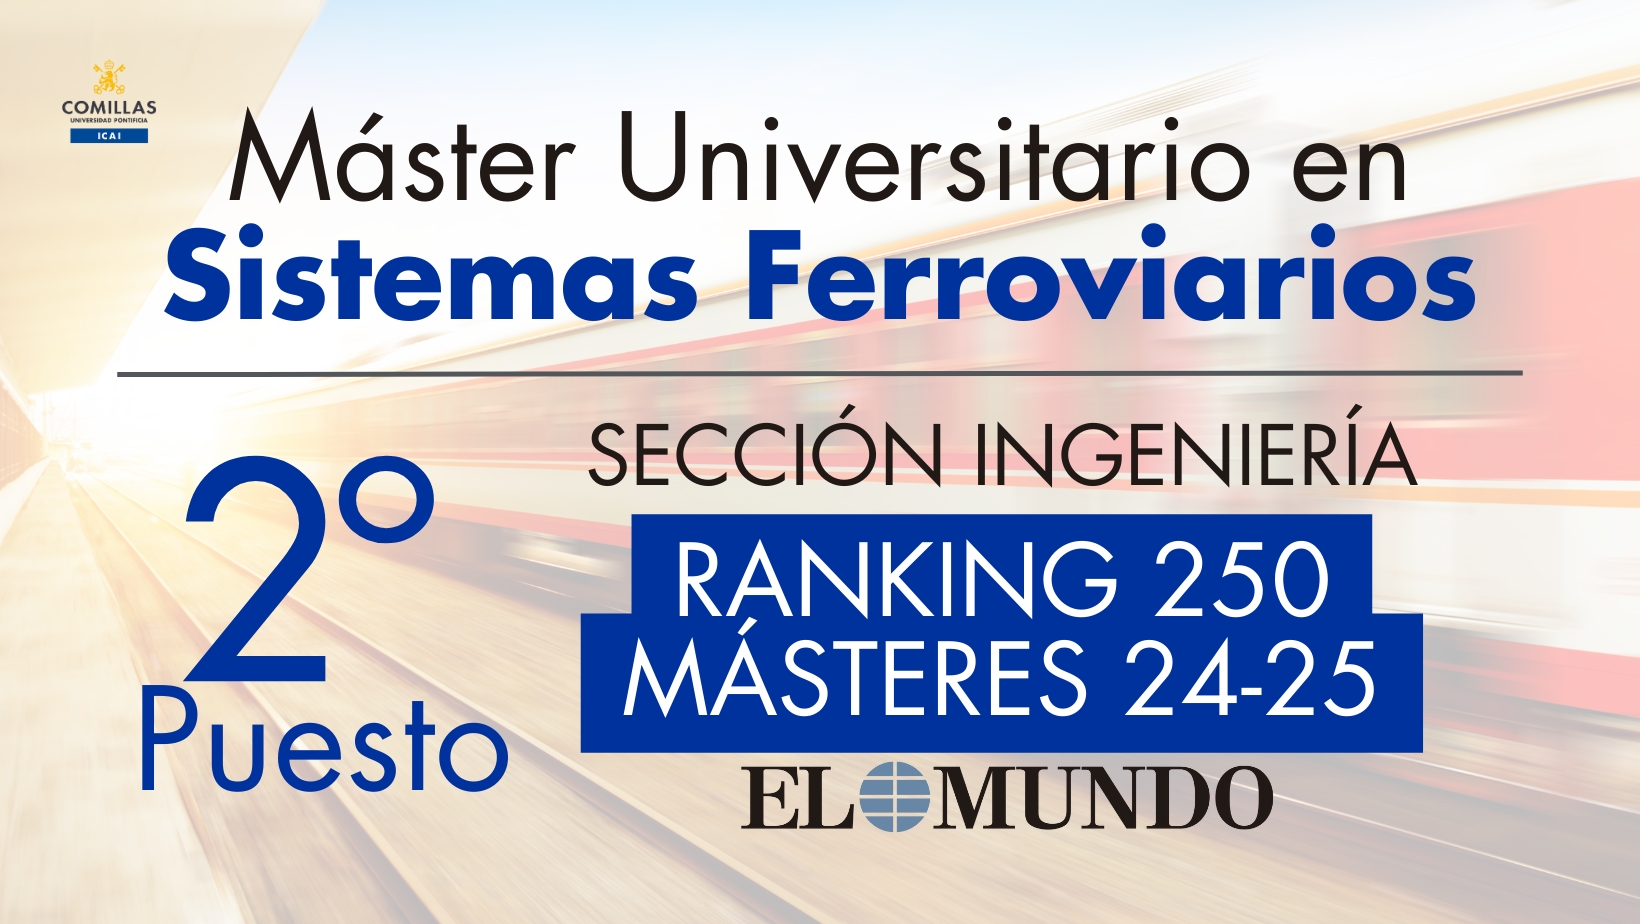 Advertisement for a Master's program in Railway Systems at Comillas University ranked second in engineering by El Mundo for 2024-25.